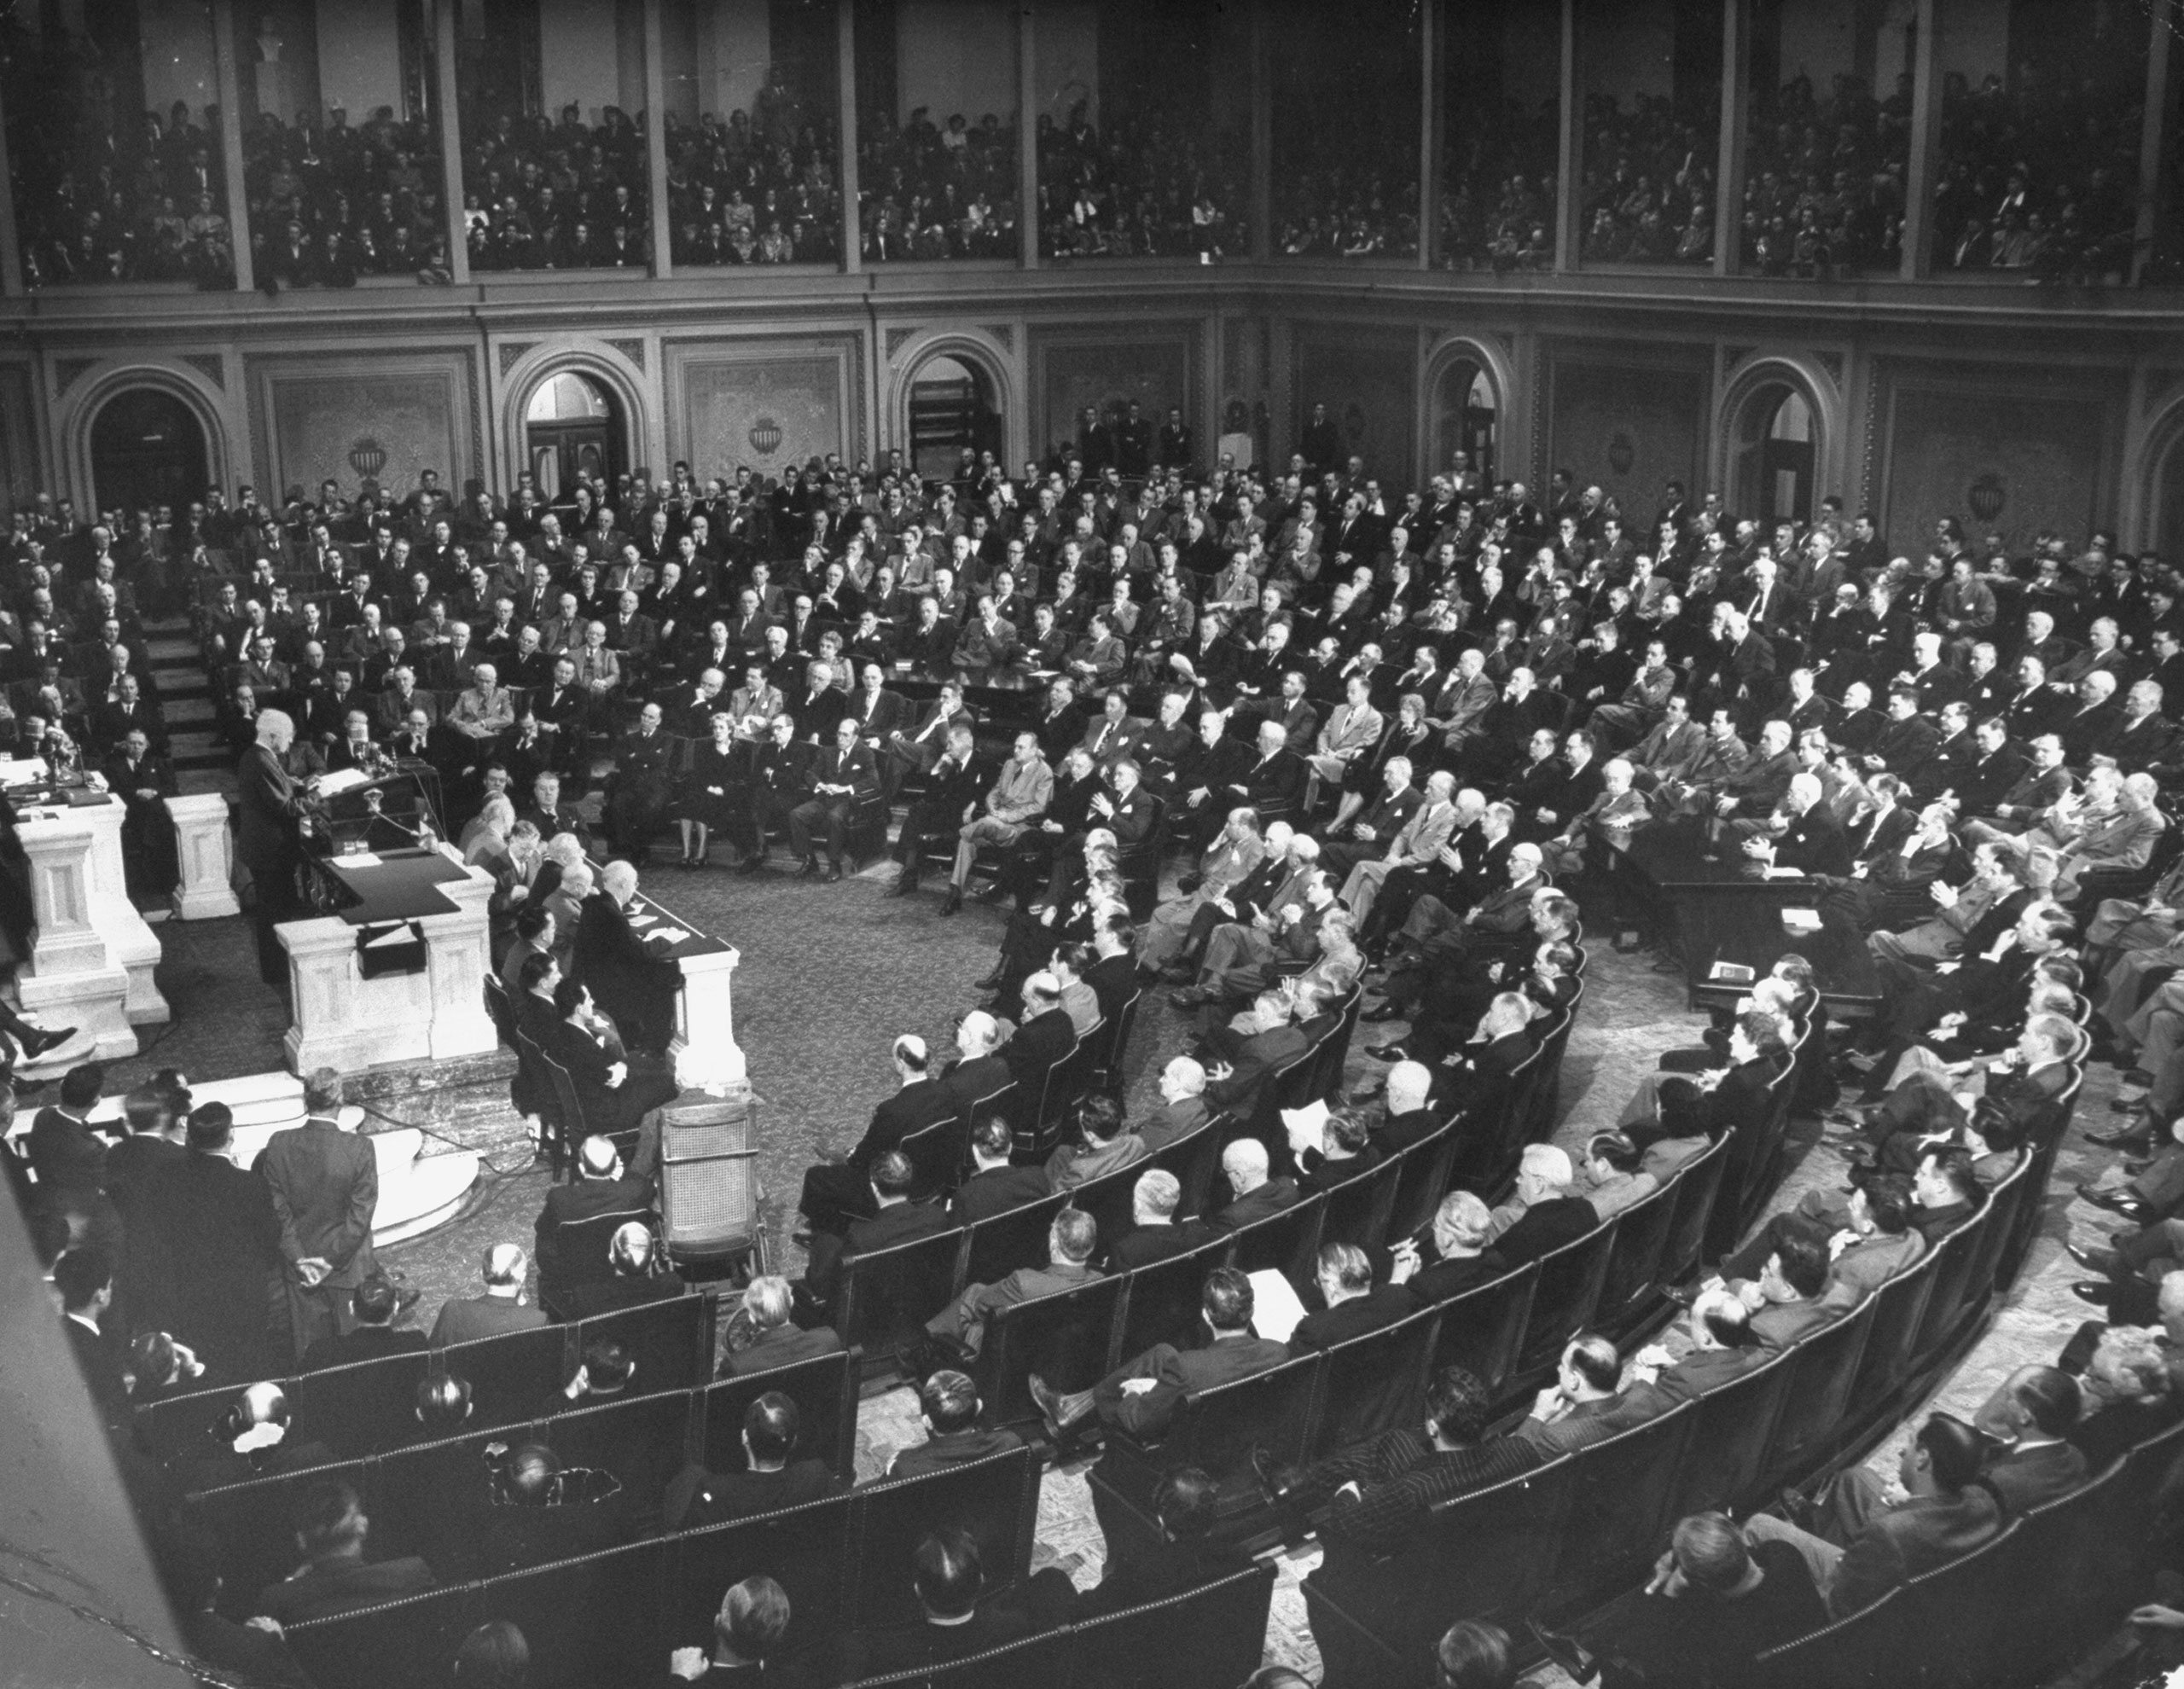 President Harry S. Truman delivering the State of the Union address in 1948.